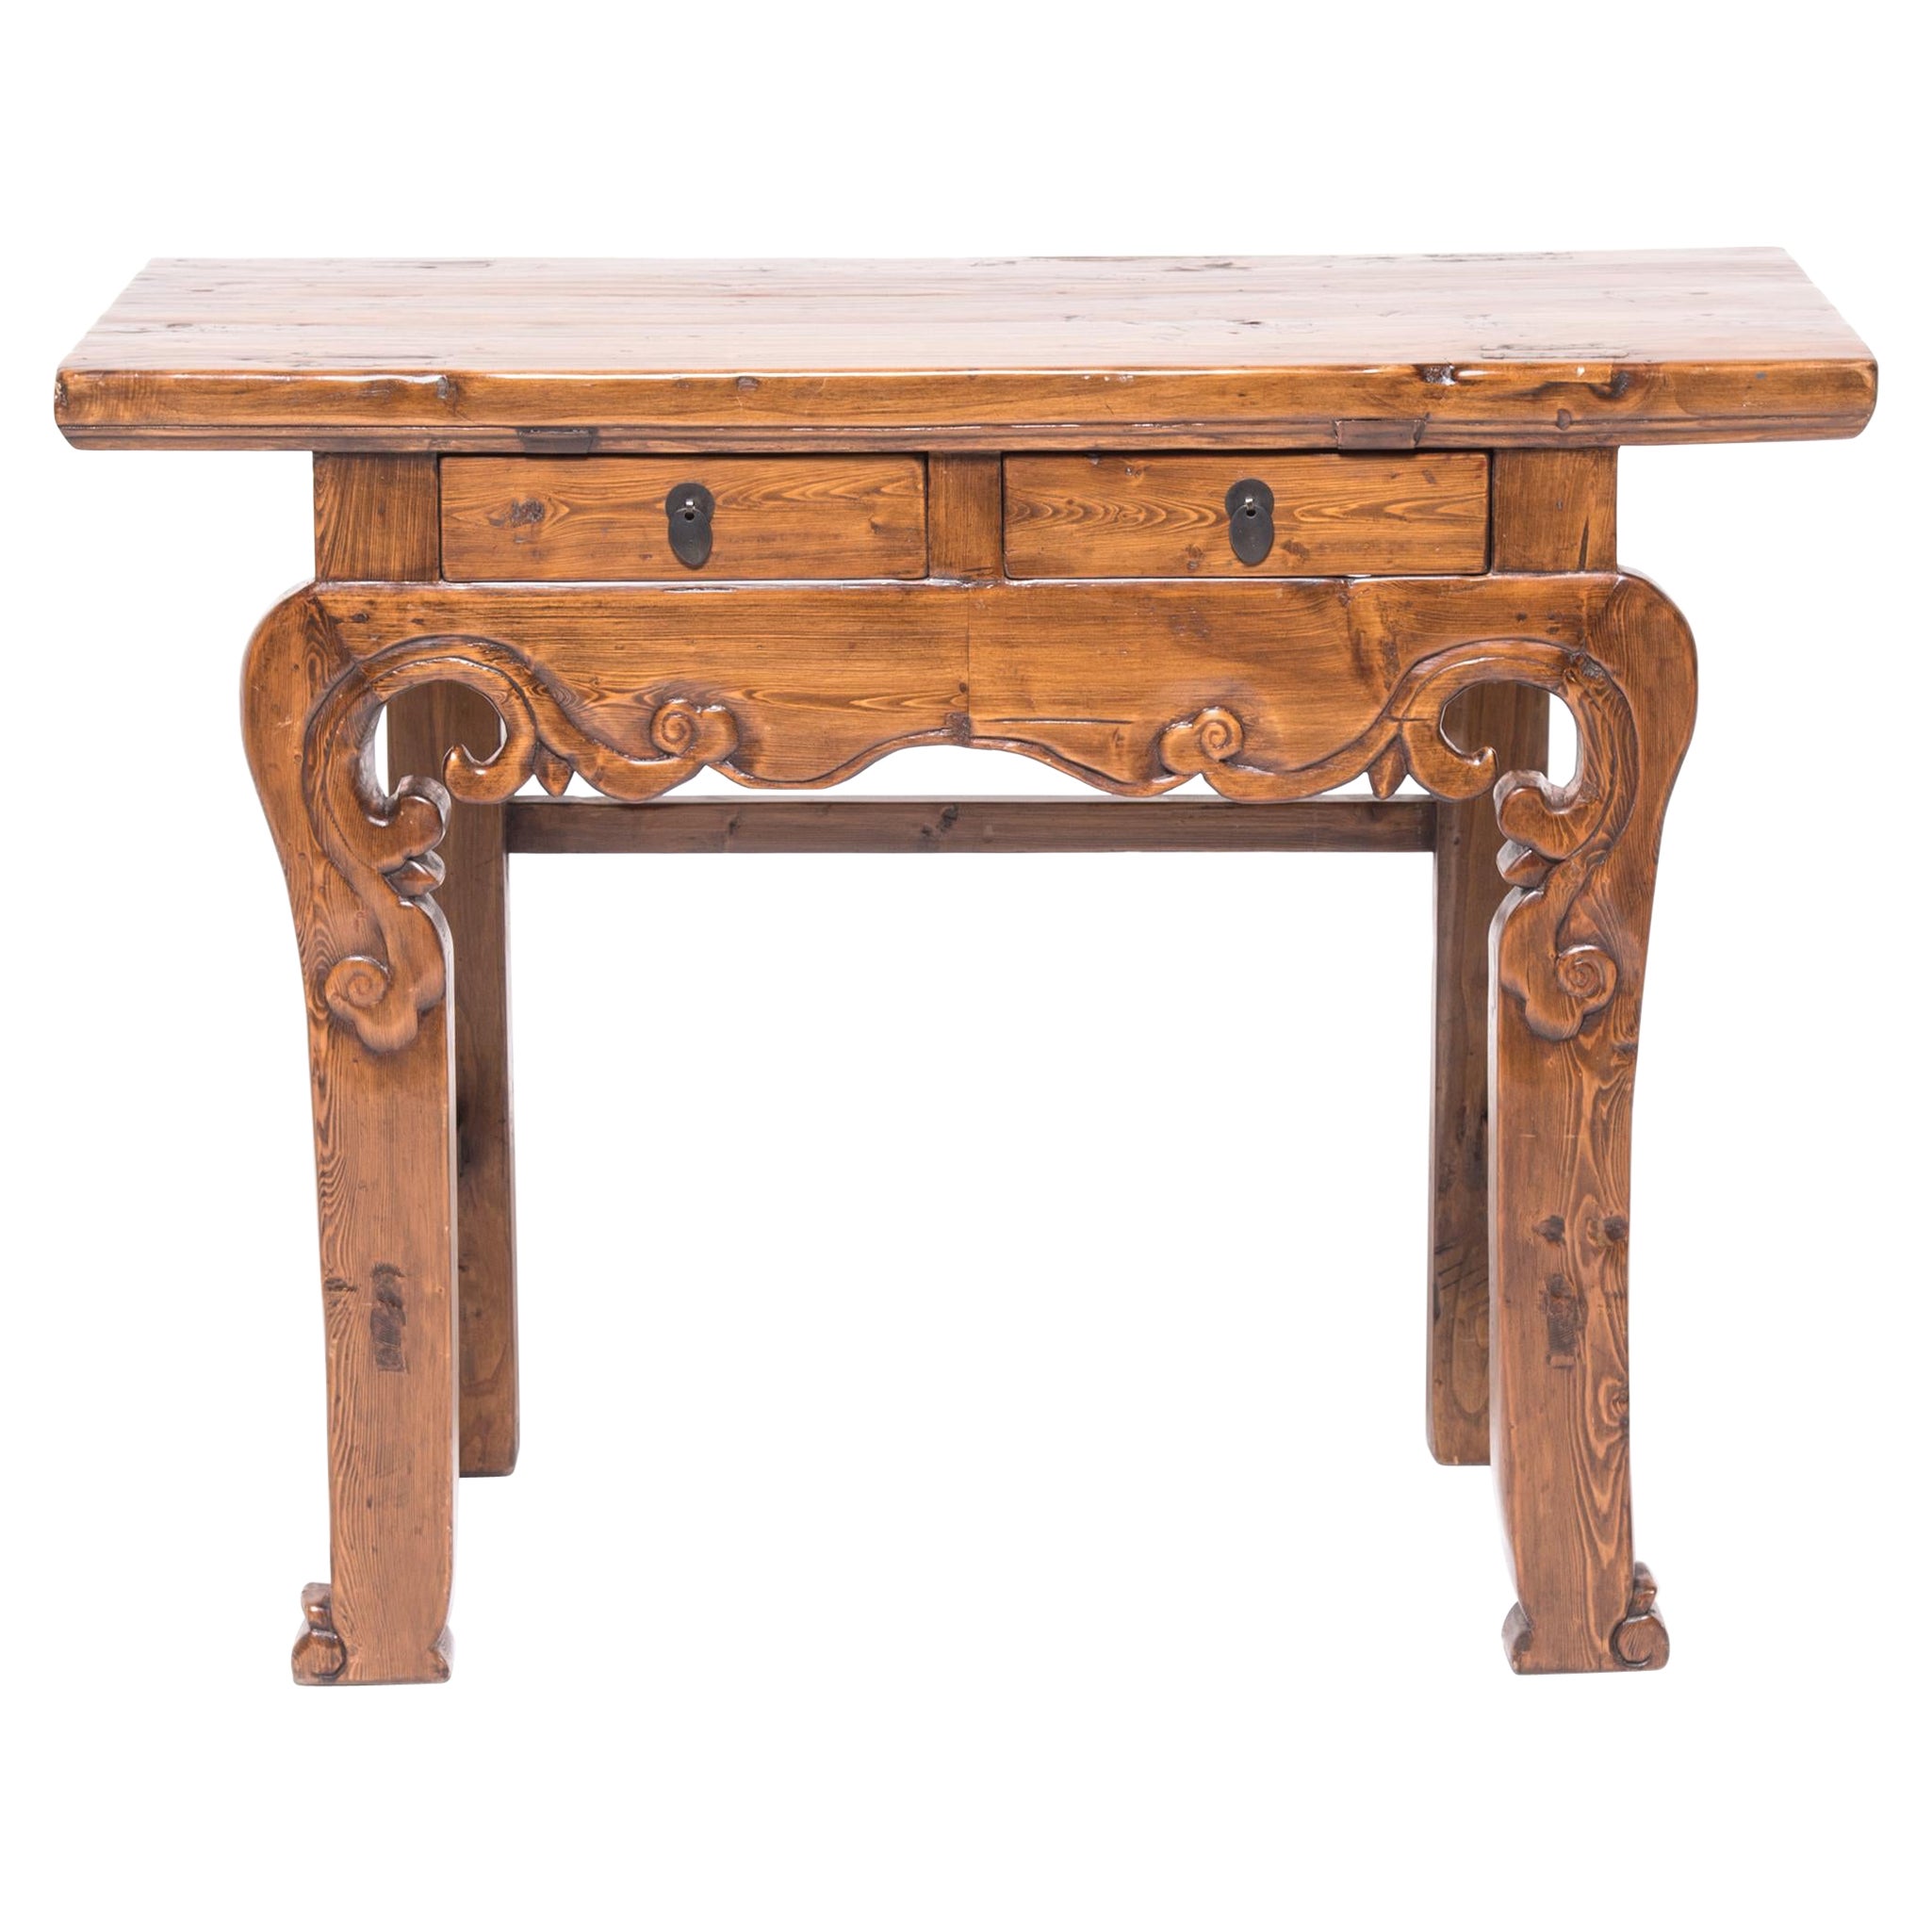 Chinese Two-Drawer Carved Altar Table, c. 1850